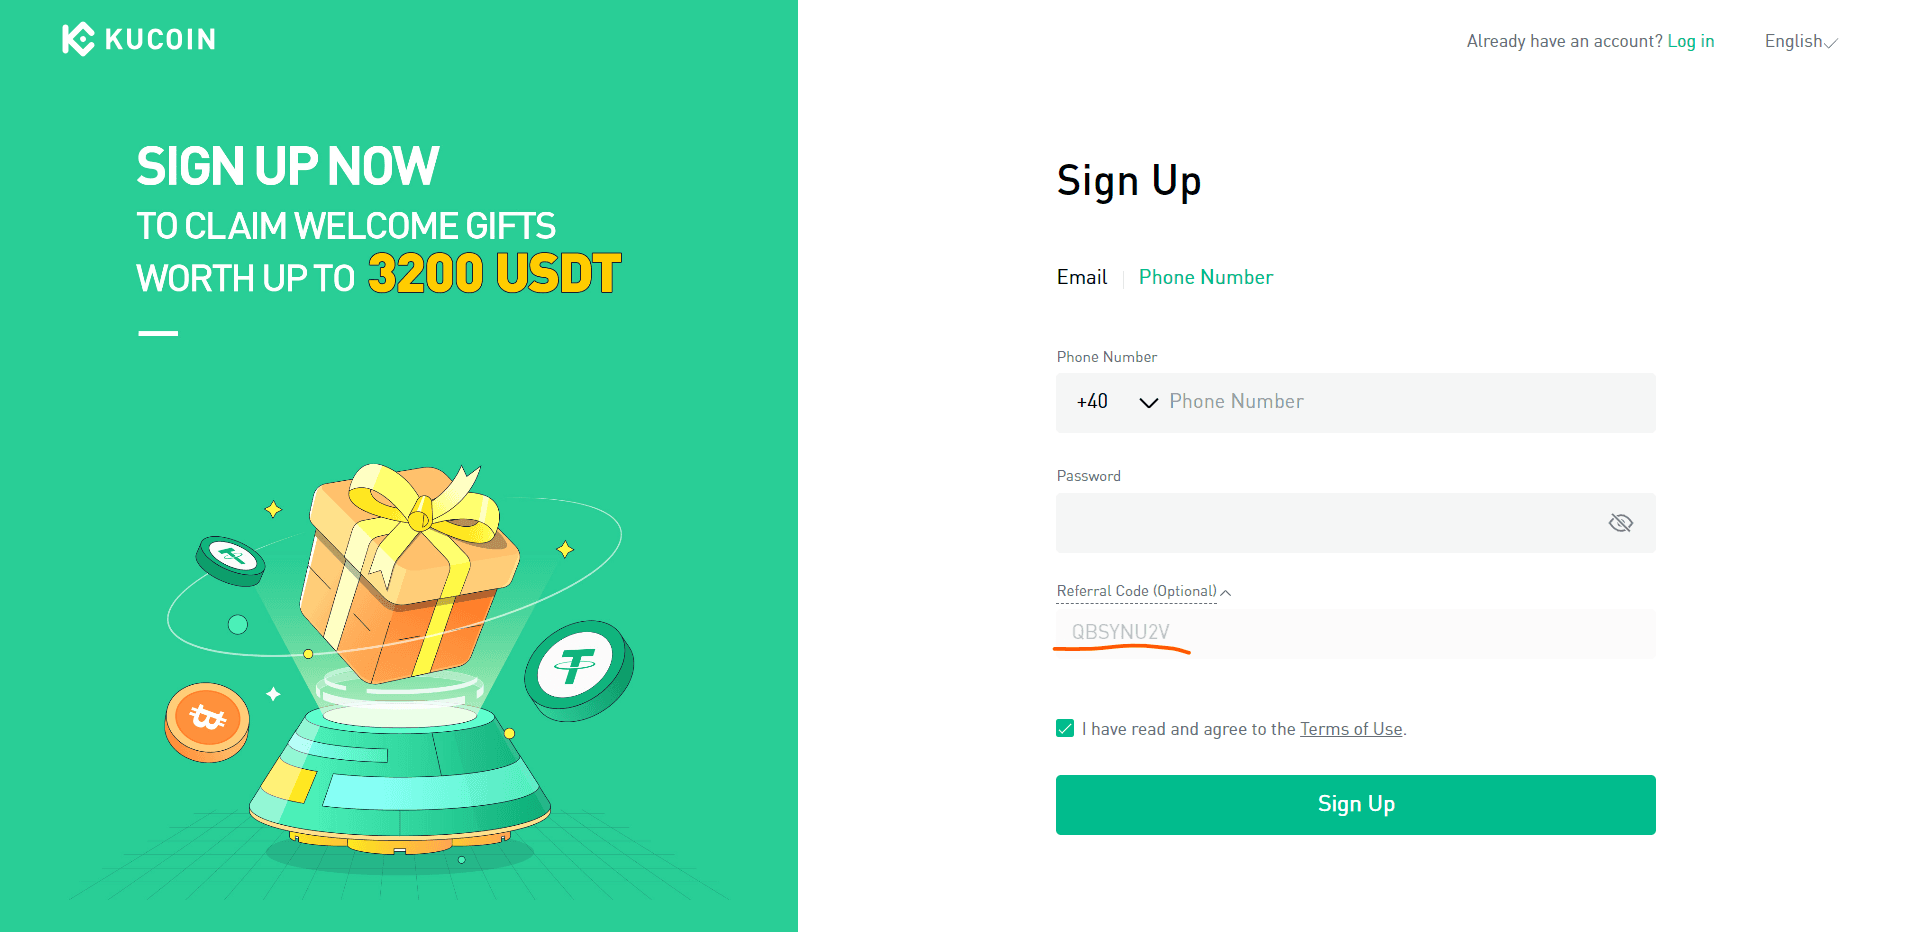 Image of KuCoin sign up page